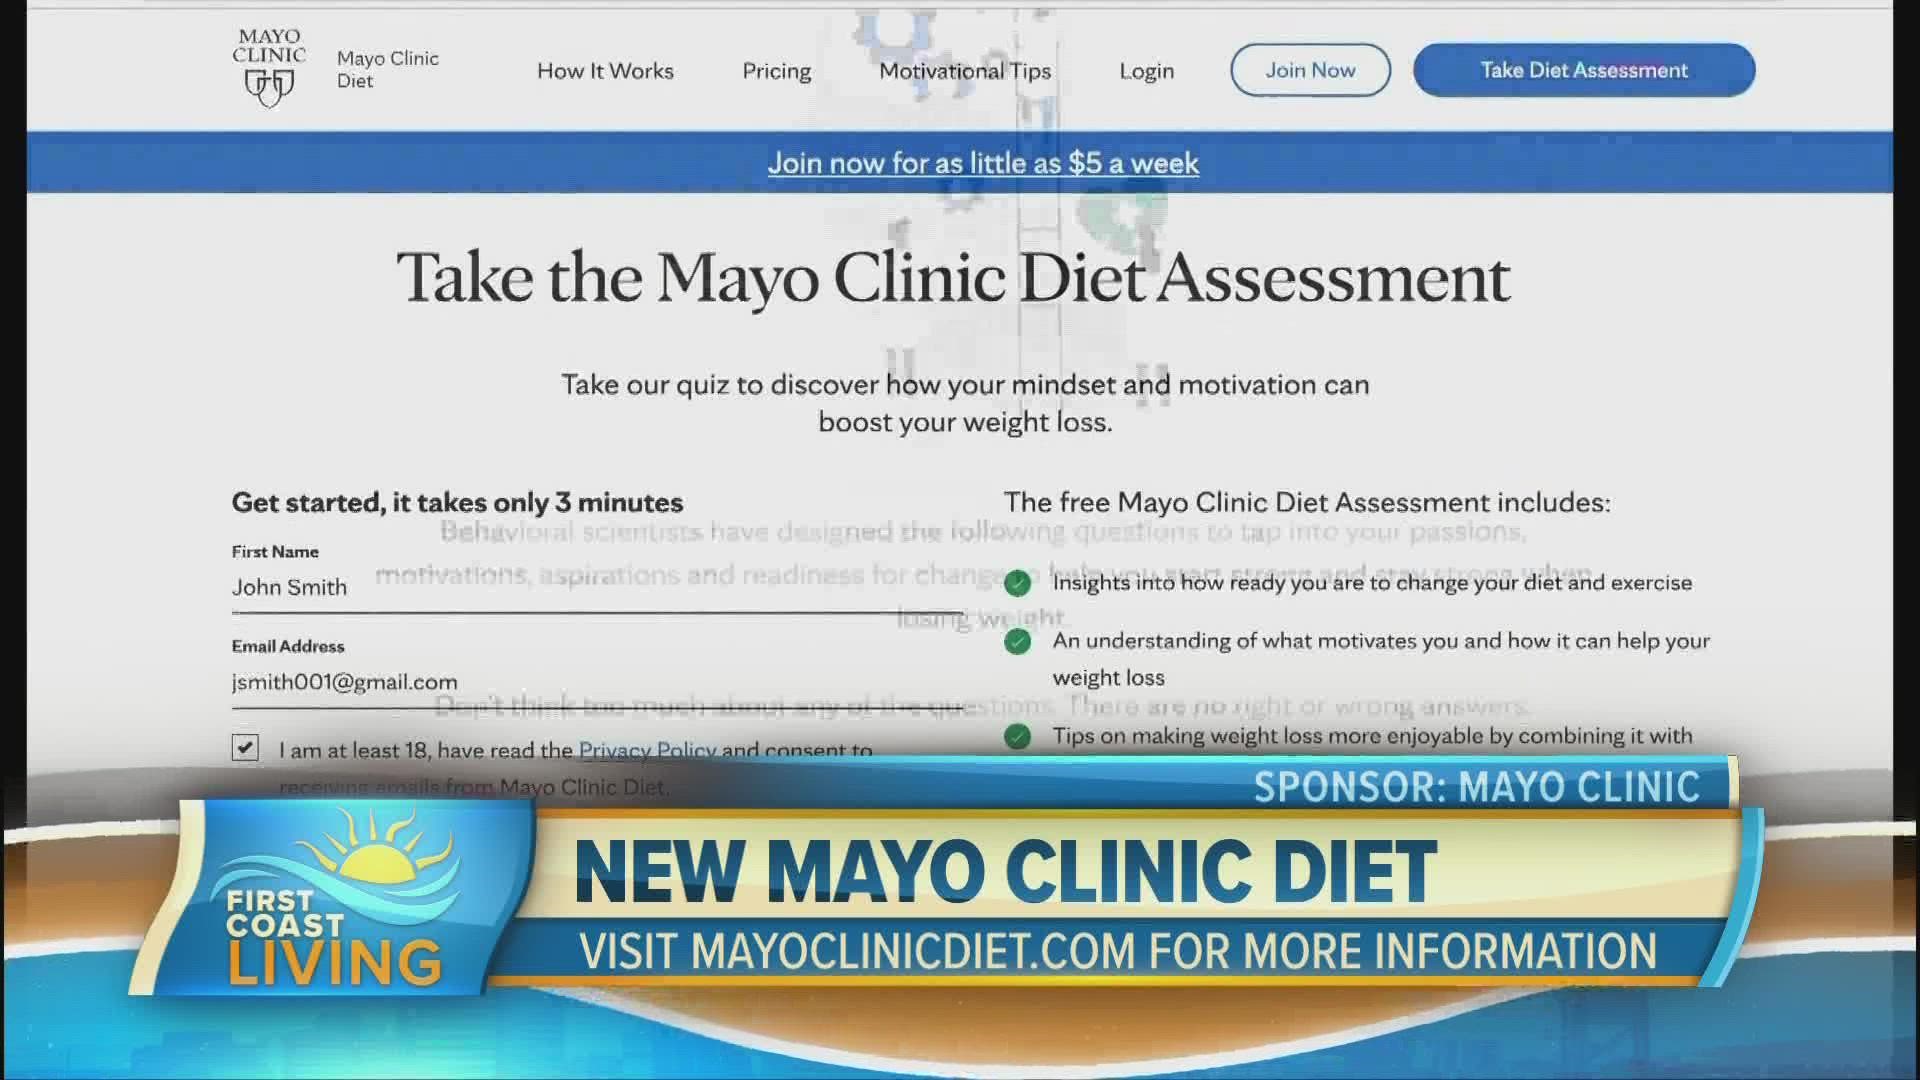 Mayo Clinic Medical Director, Dr. Donald Hensrud,
offers advice on how to improve your health and make better lifestyle choices.